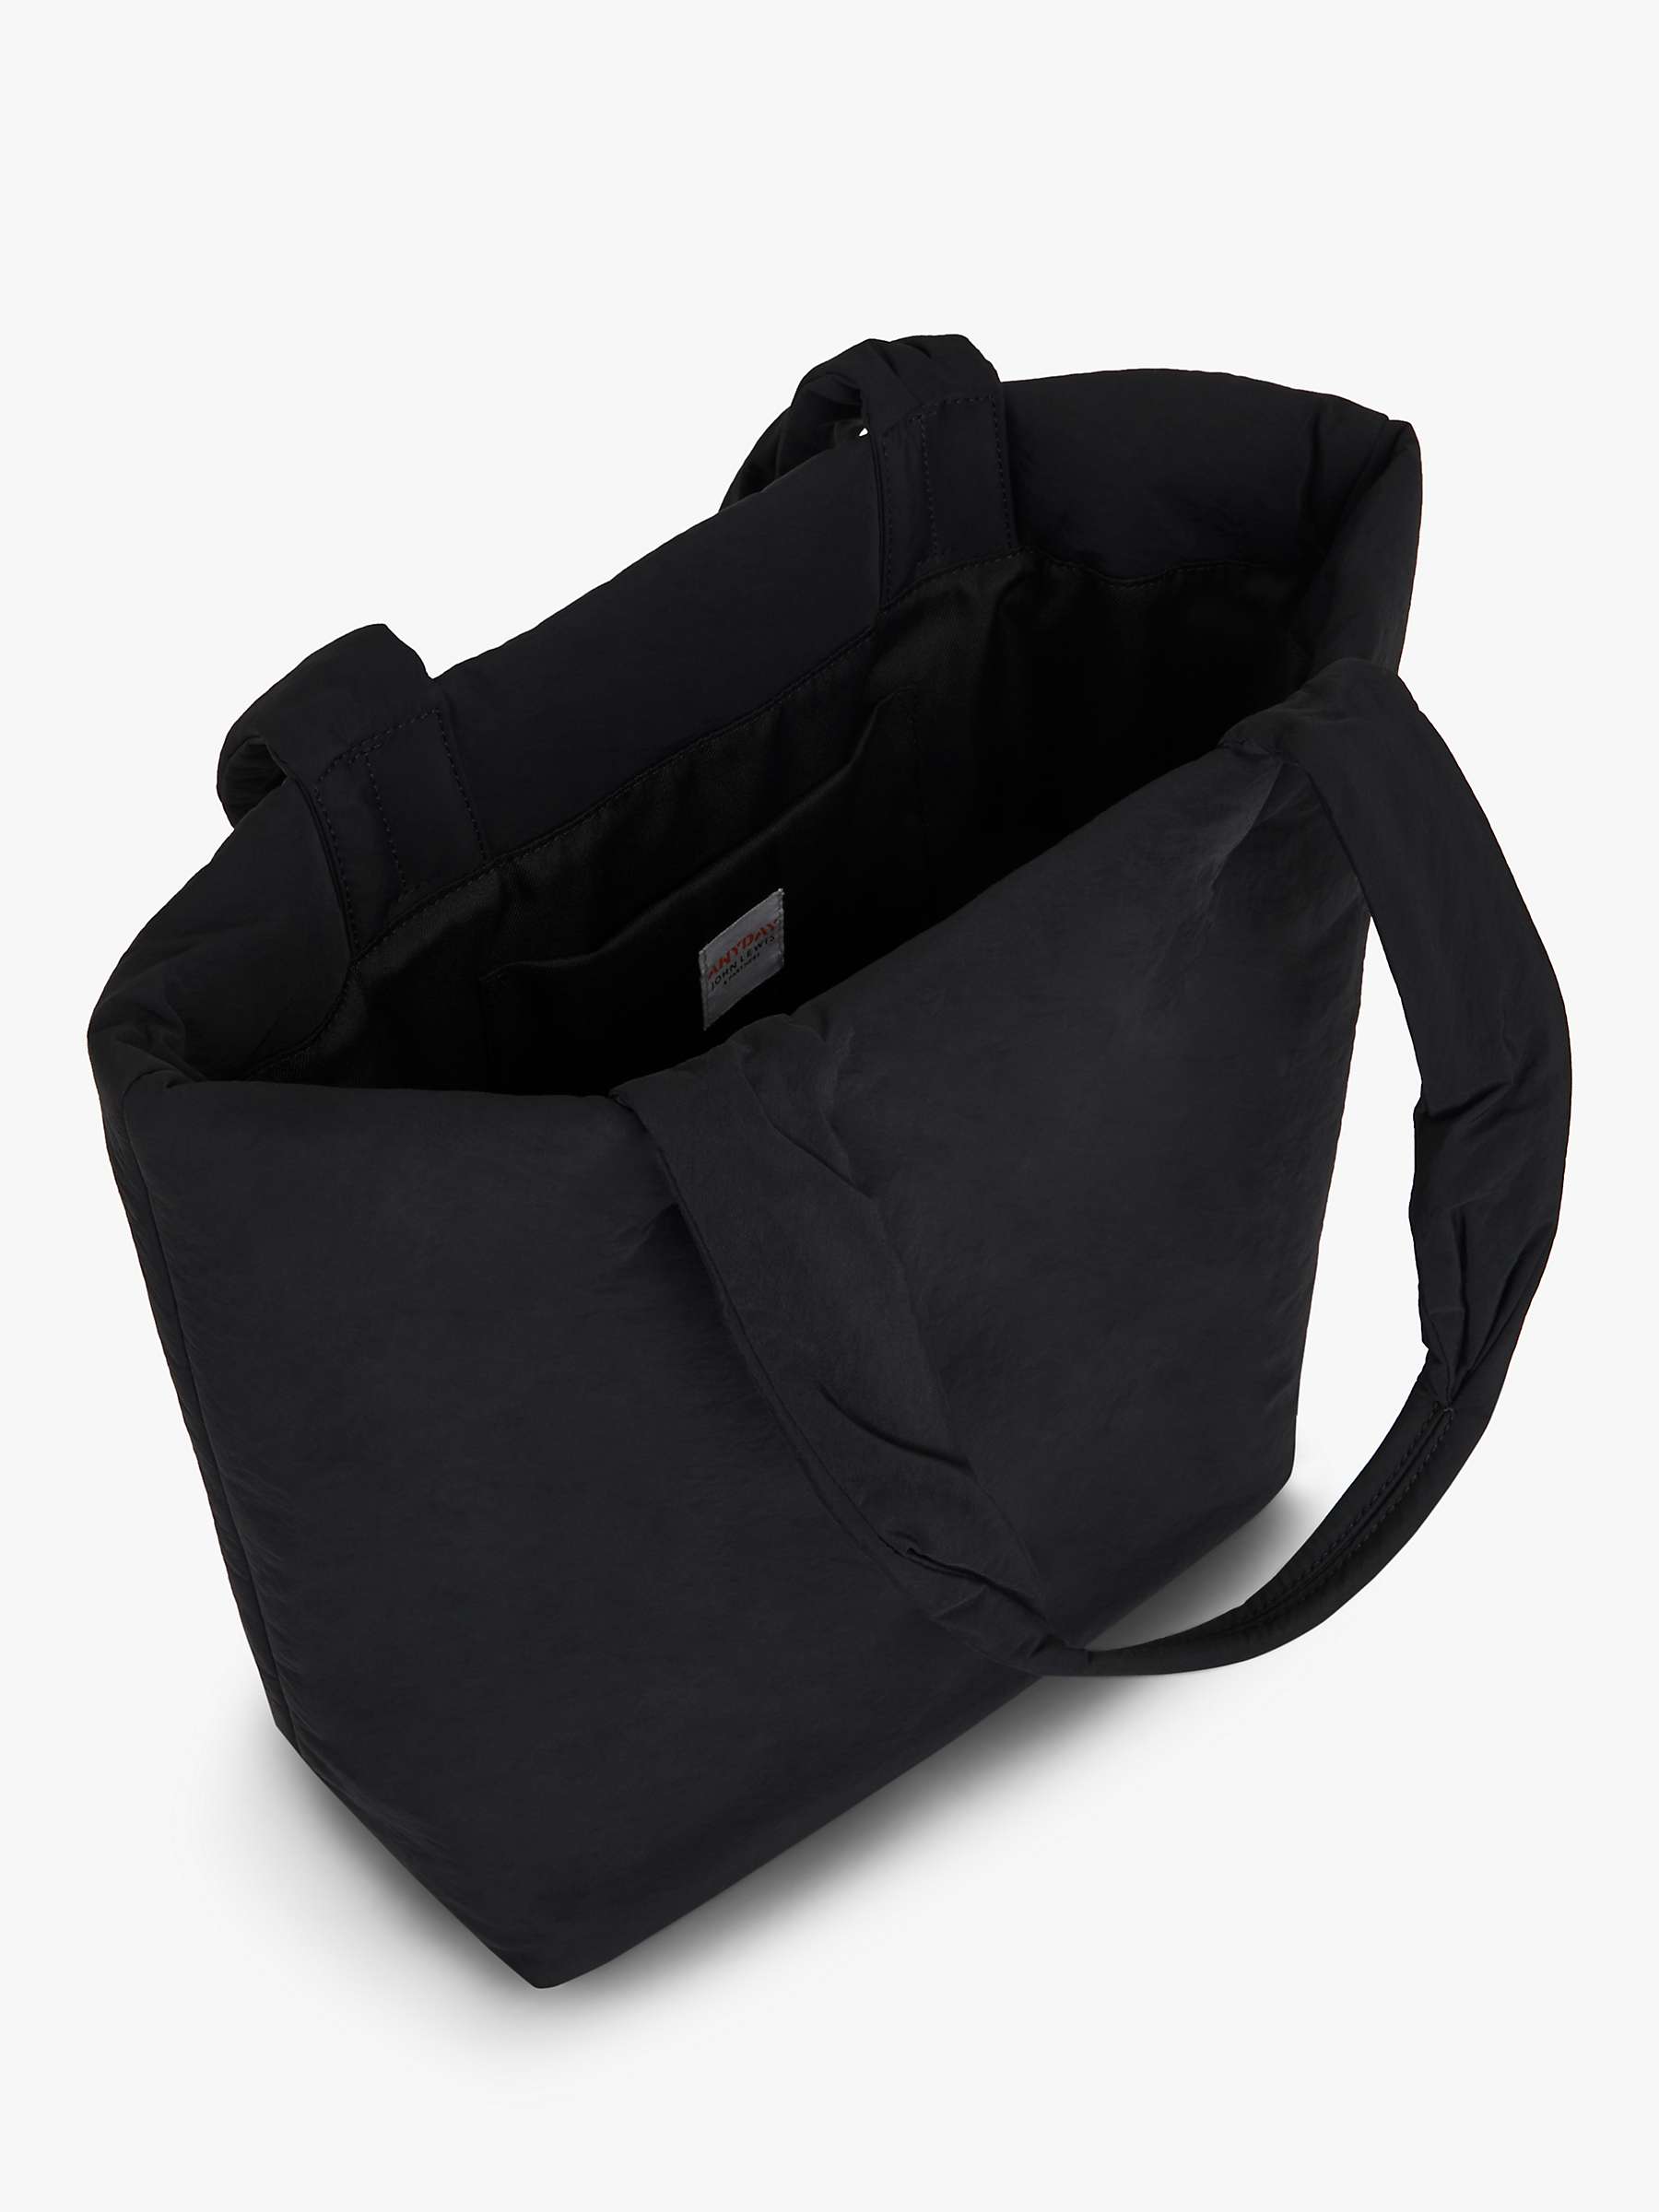 Buy John Lewis ANYDAY Puffy North South Tote Bag Online at johnlewis.com